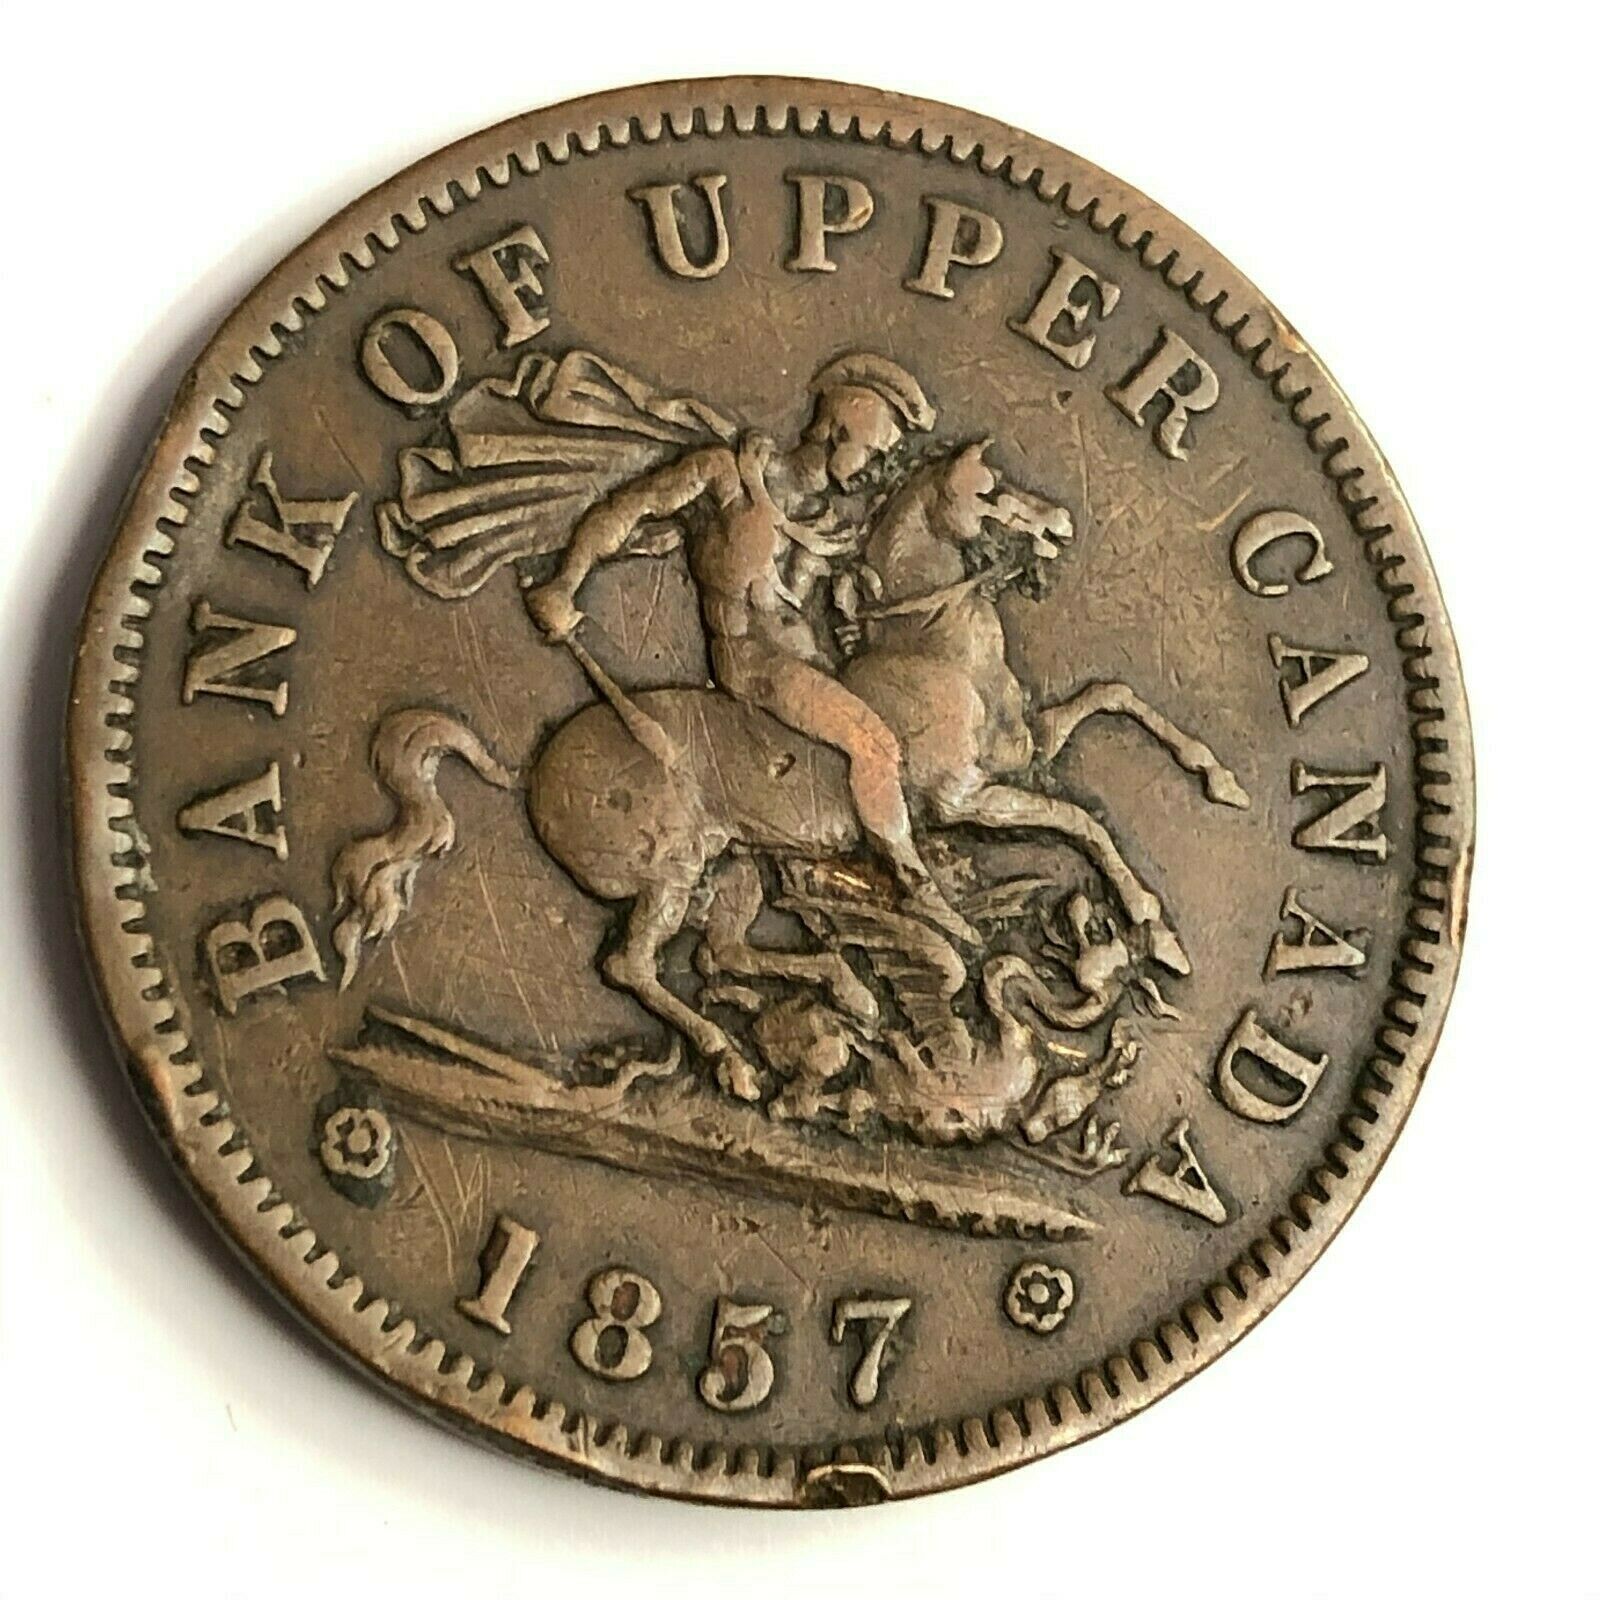 1857 Bank Of Upper Canada One Penny, St George & Dragon Token, Km#tn3